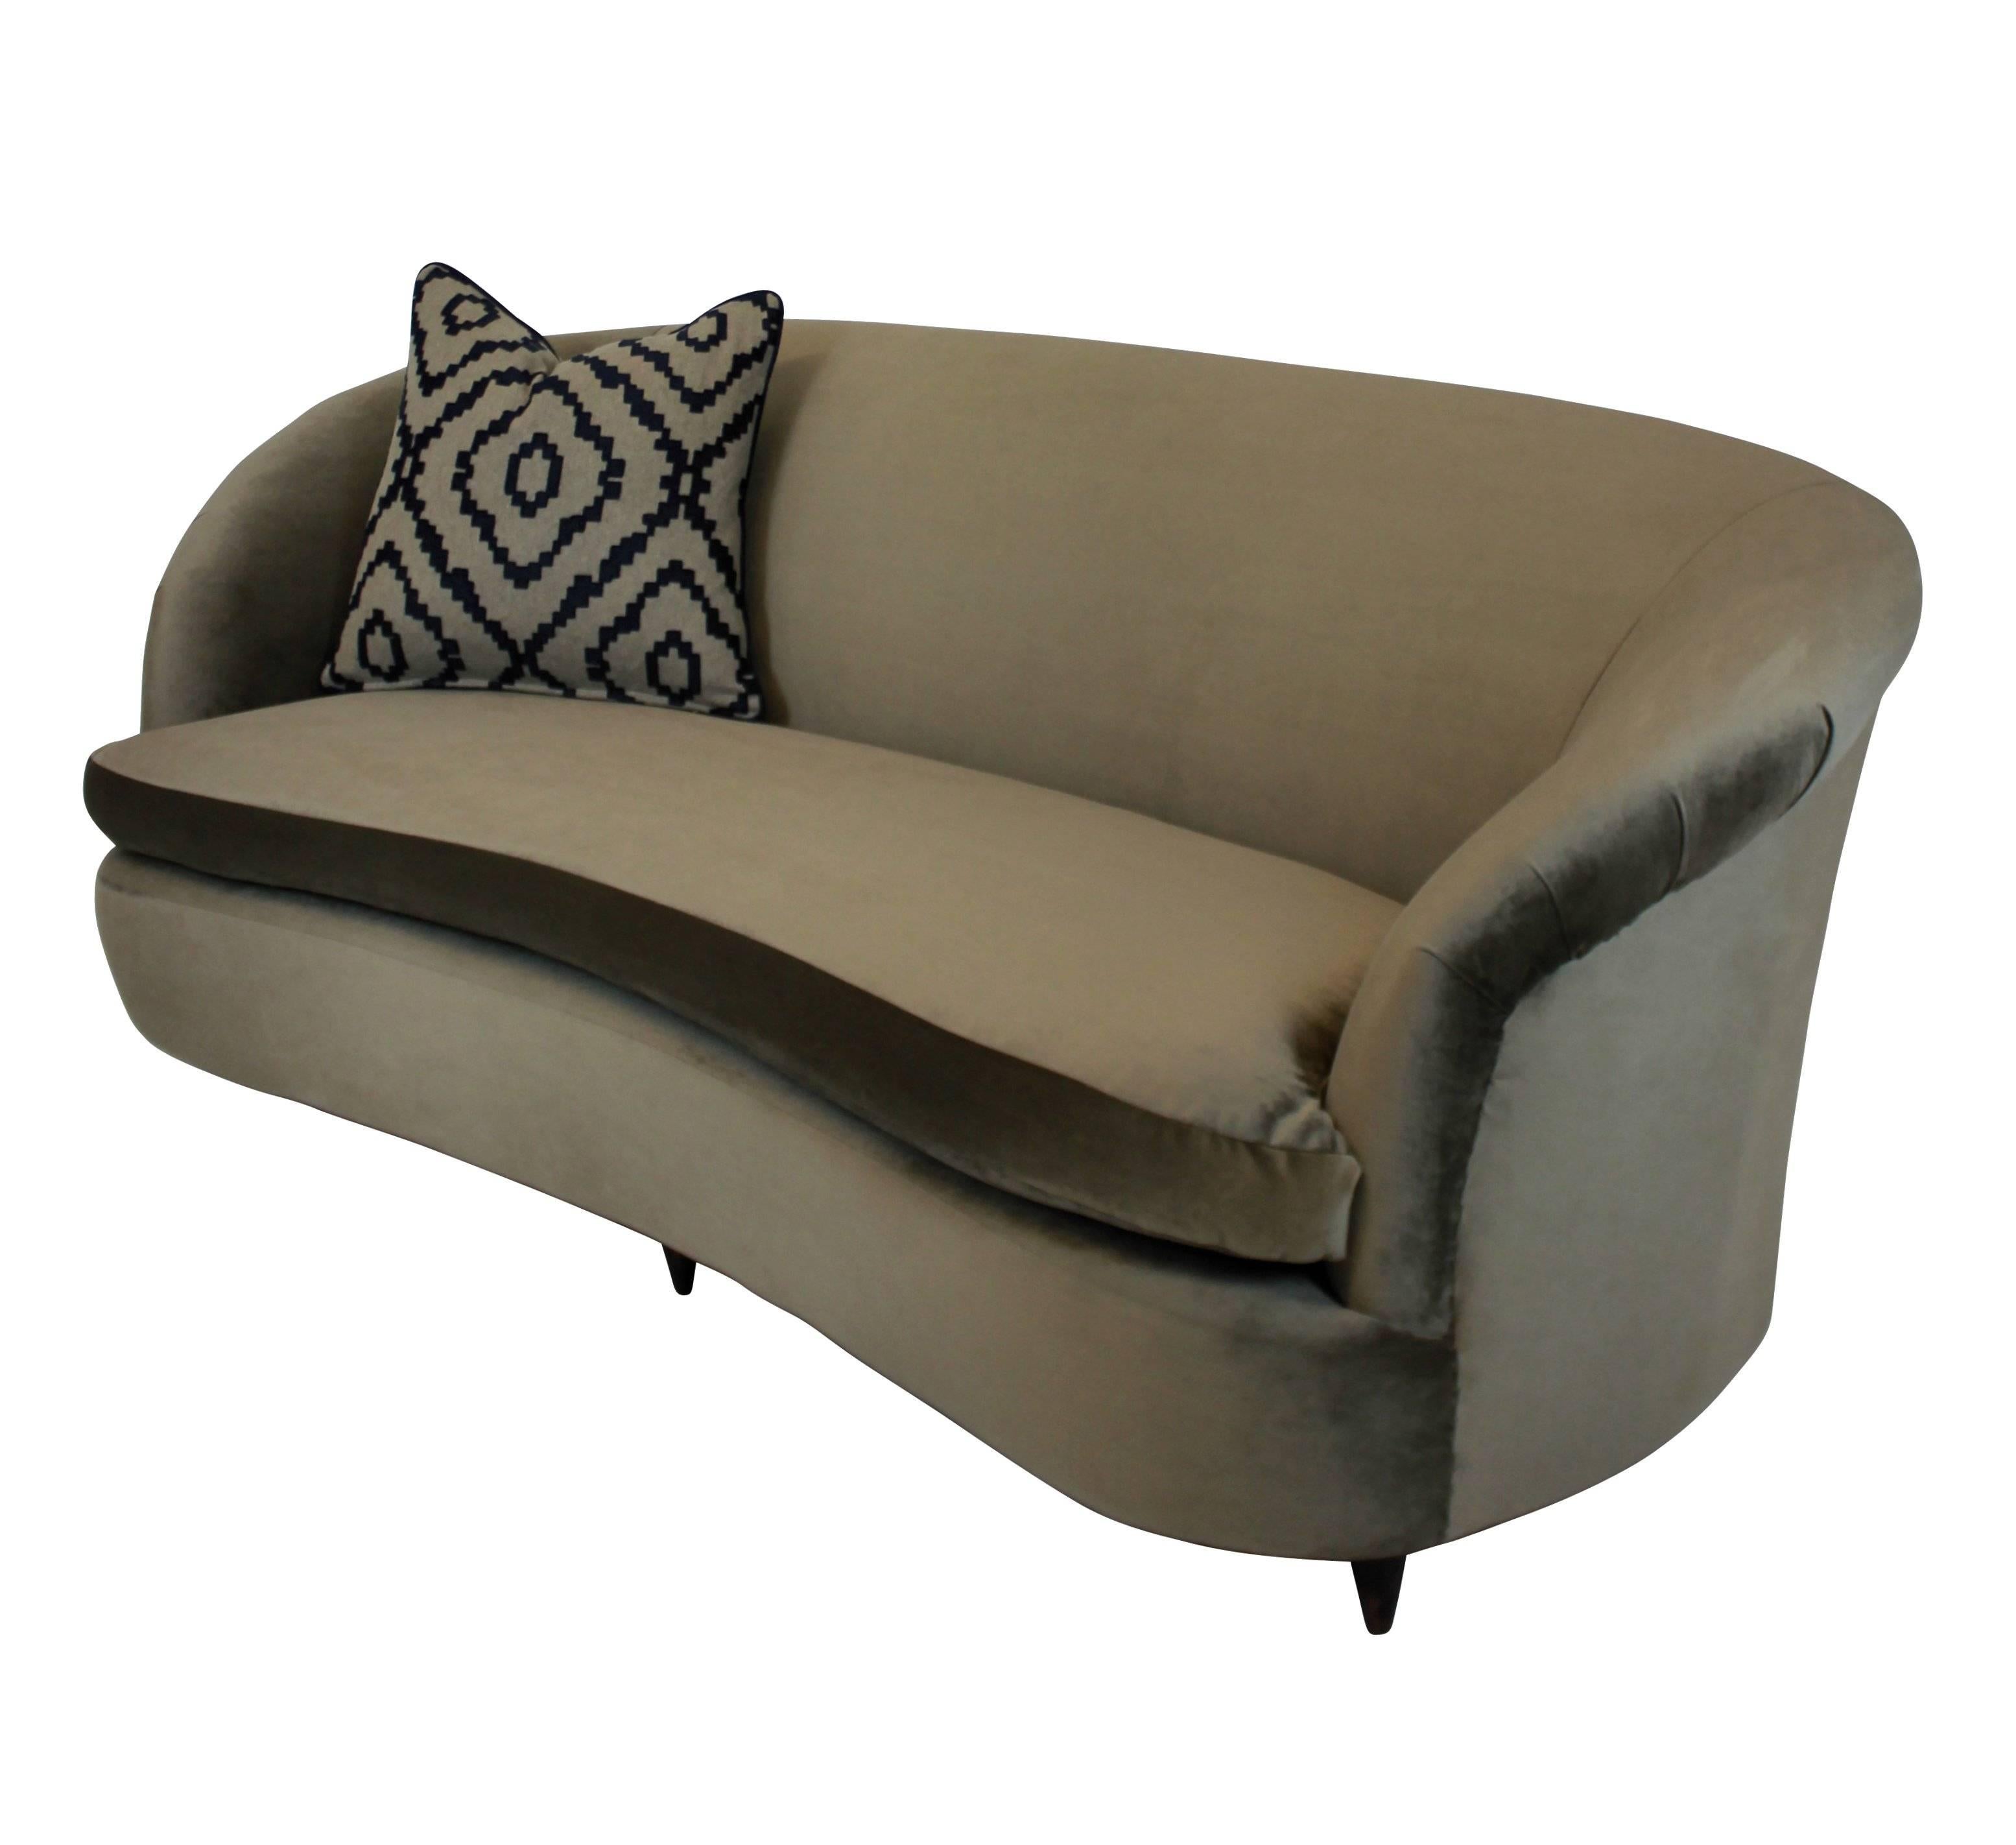 A large three-seat, extremely comfortable sculptural settee by Parisi, with swab cushion and newly upholstered in mole velvet.

